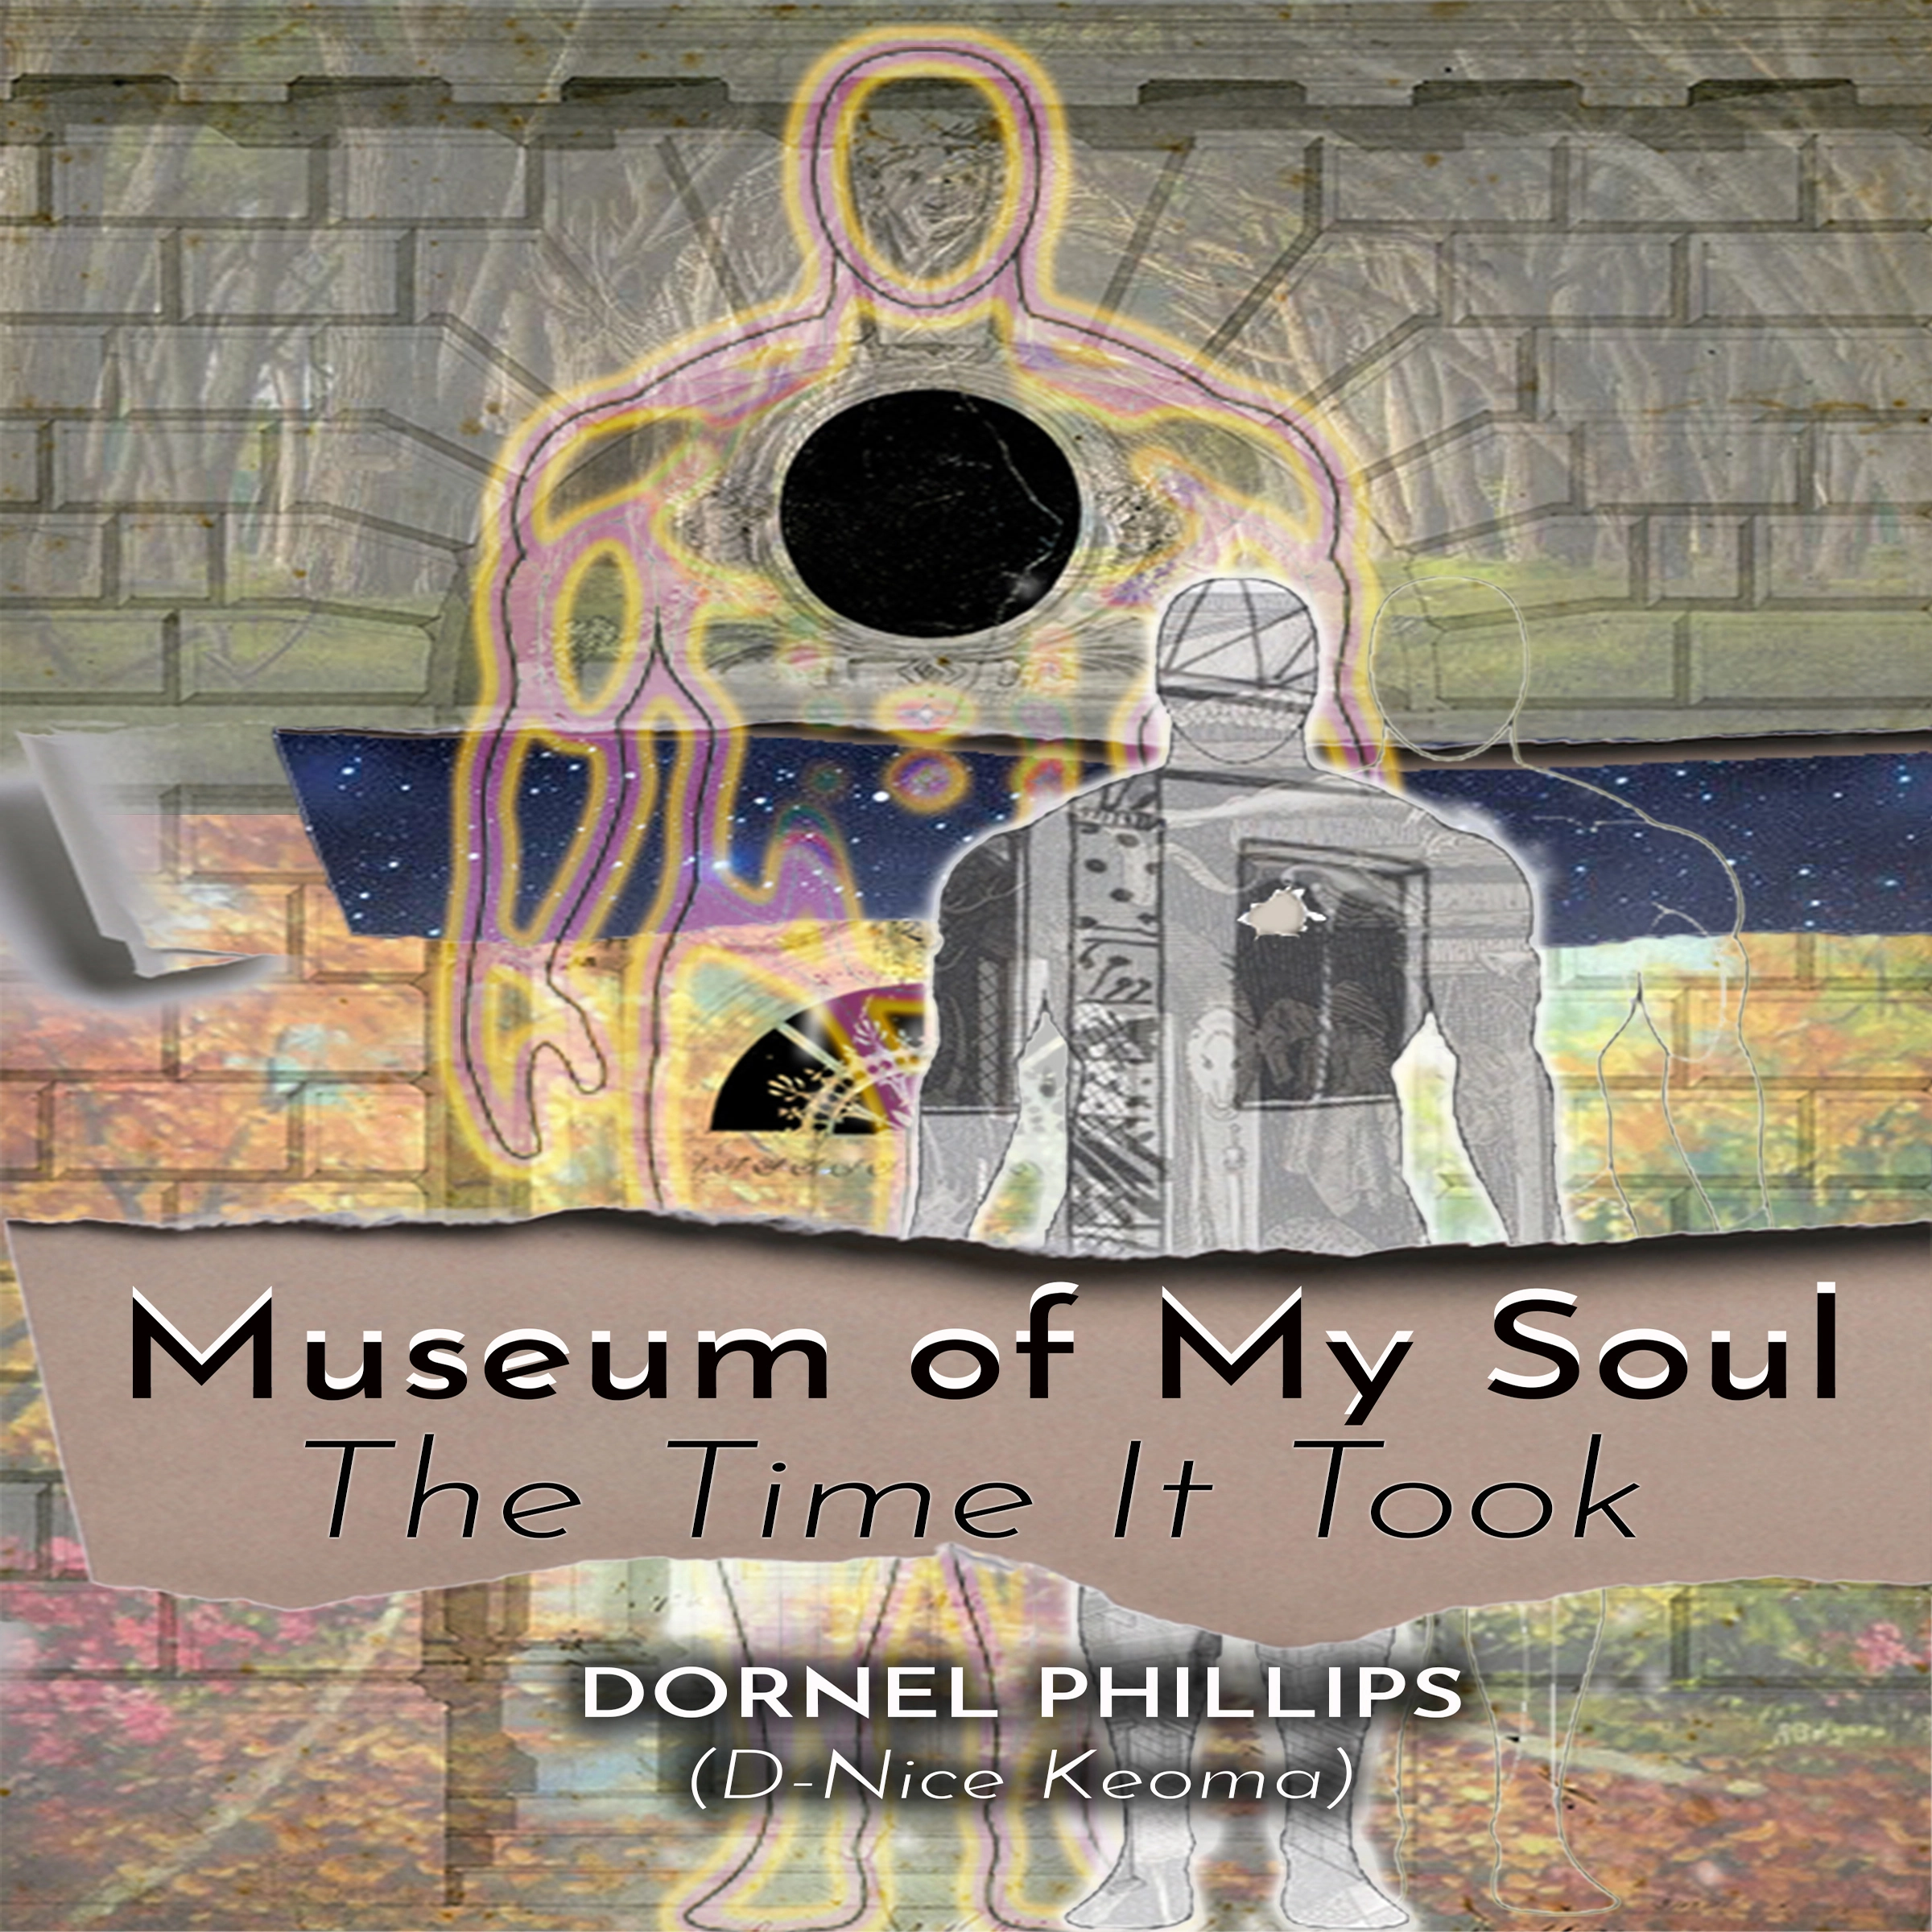 Museum of My Soul by Dornel Phillips Audiobook